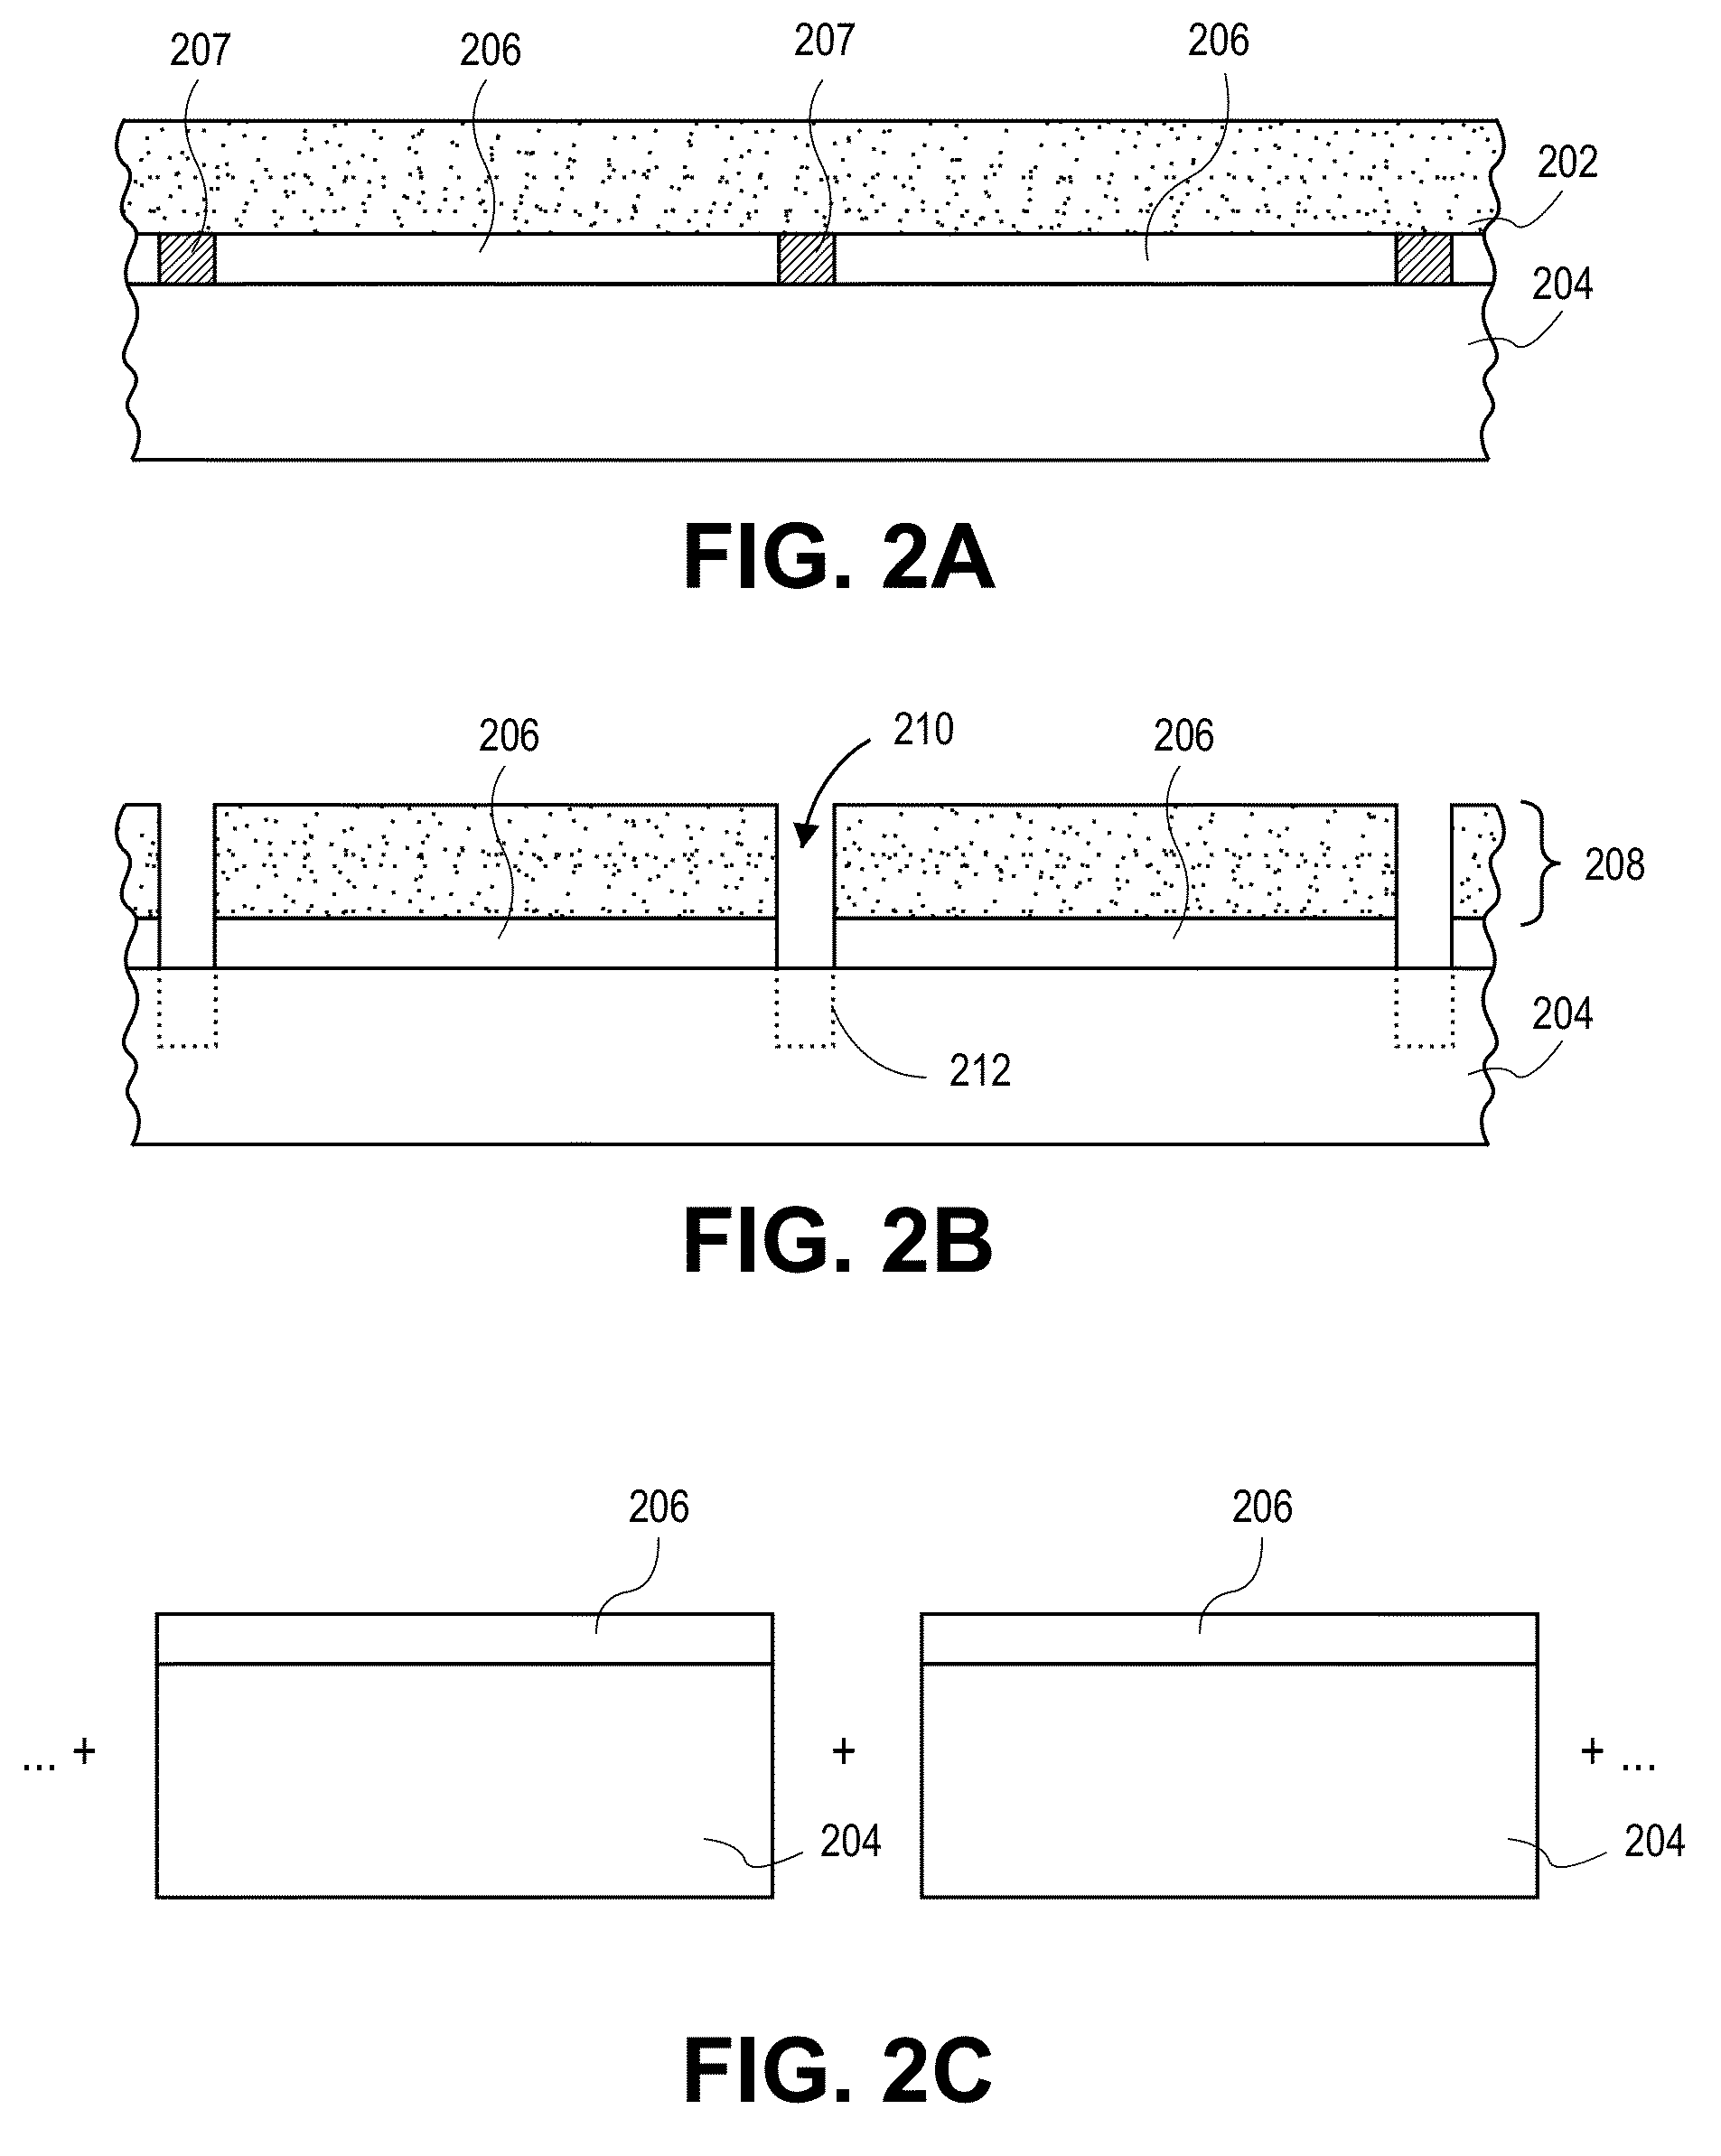 Wafer dicing using hybrid multi-step laser scribing process with plasma etch